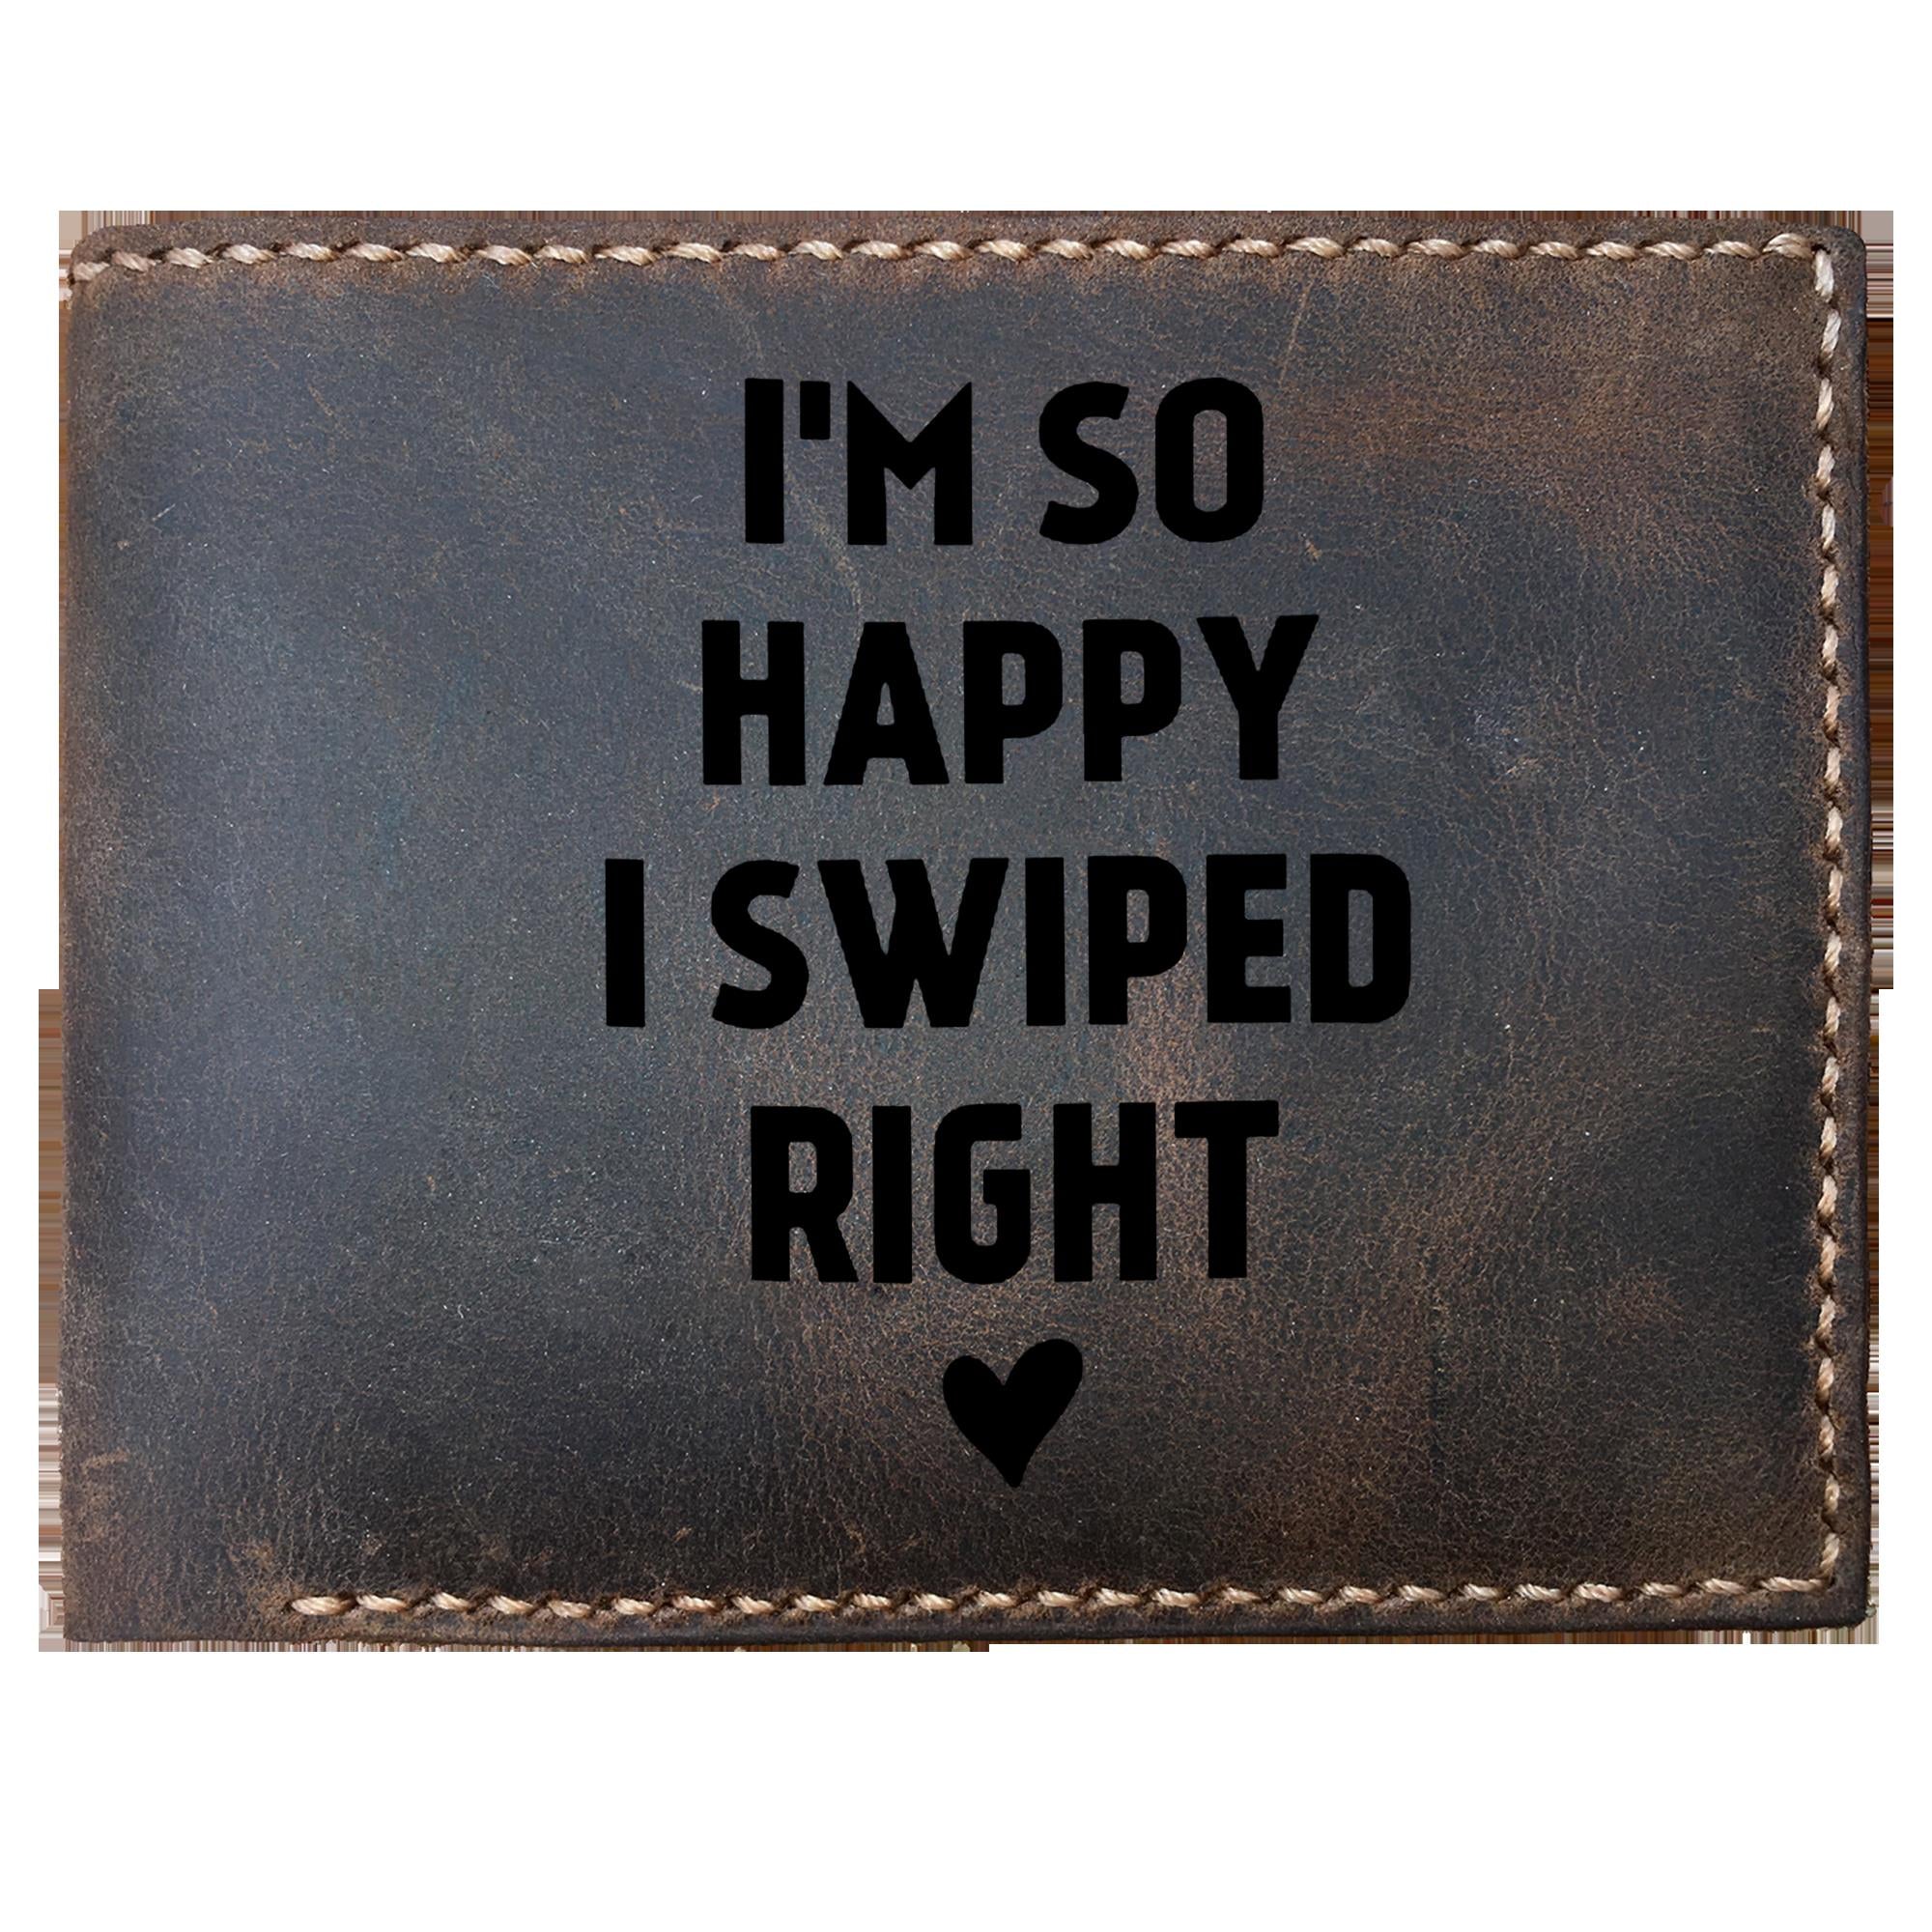 Skitongifts Funny Custom Laser Engraved Bifold Leather Wallet For Men, Im So Happy Swiped Right Fun Quote